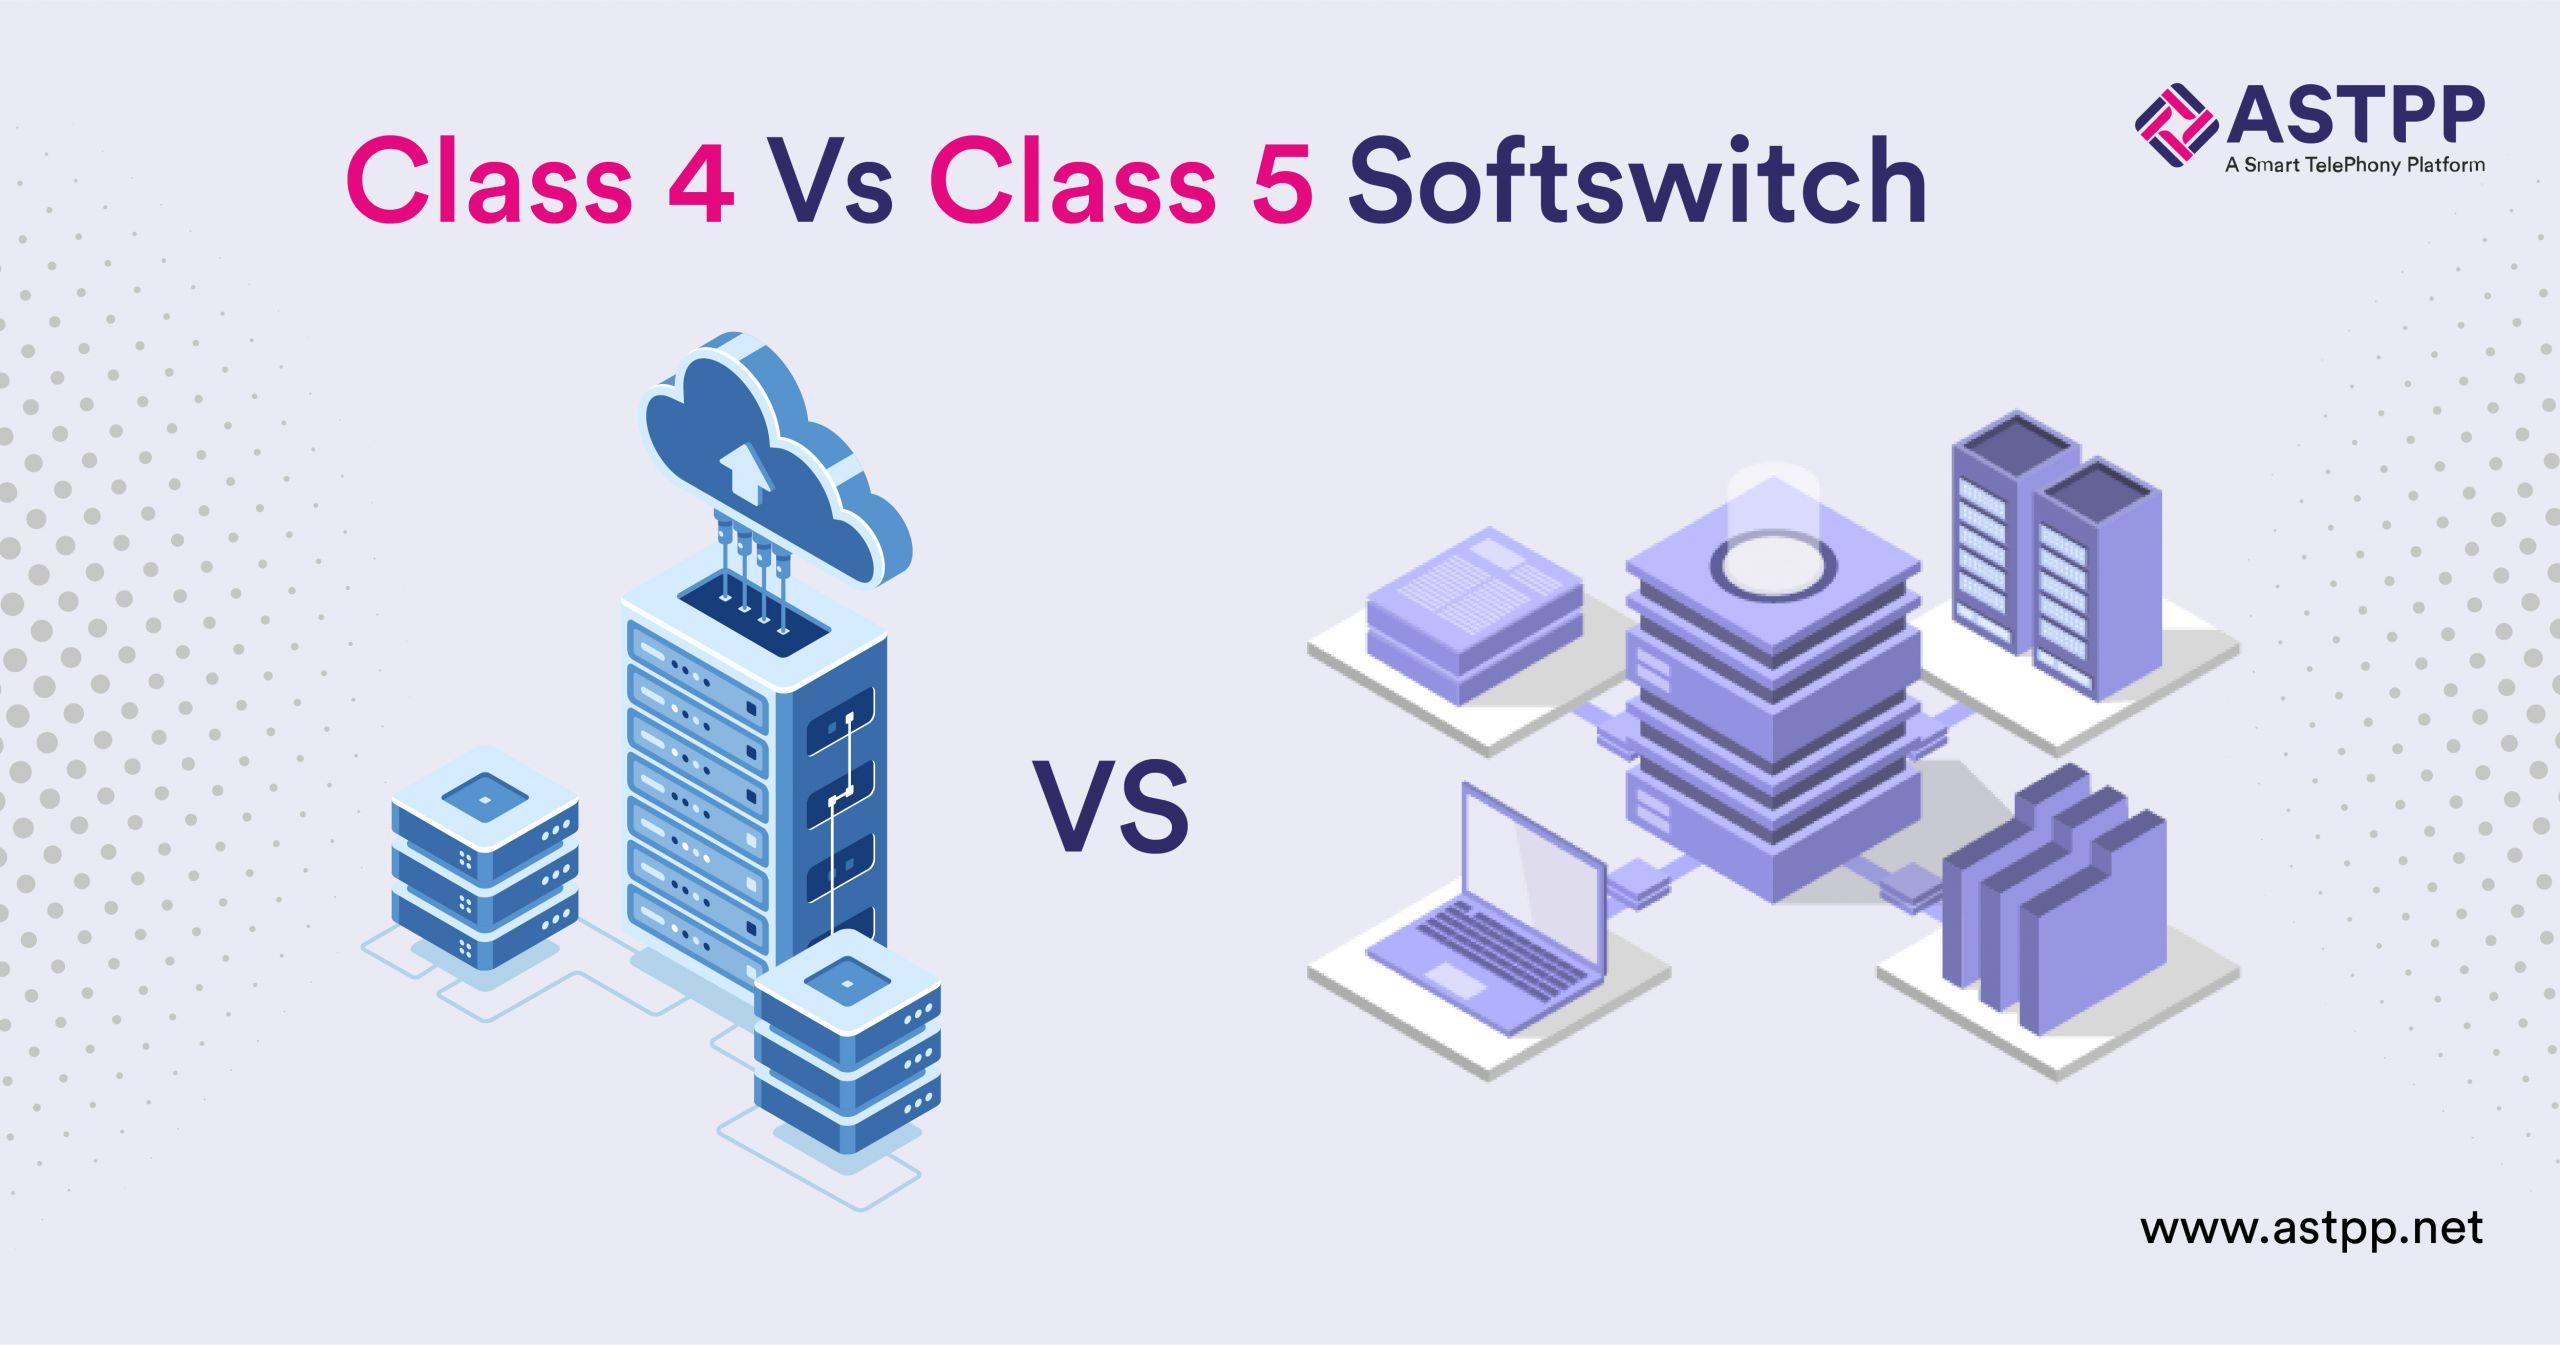 Difference Between Class 4 and Class 5 Softswitch